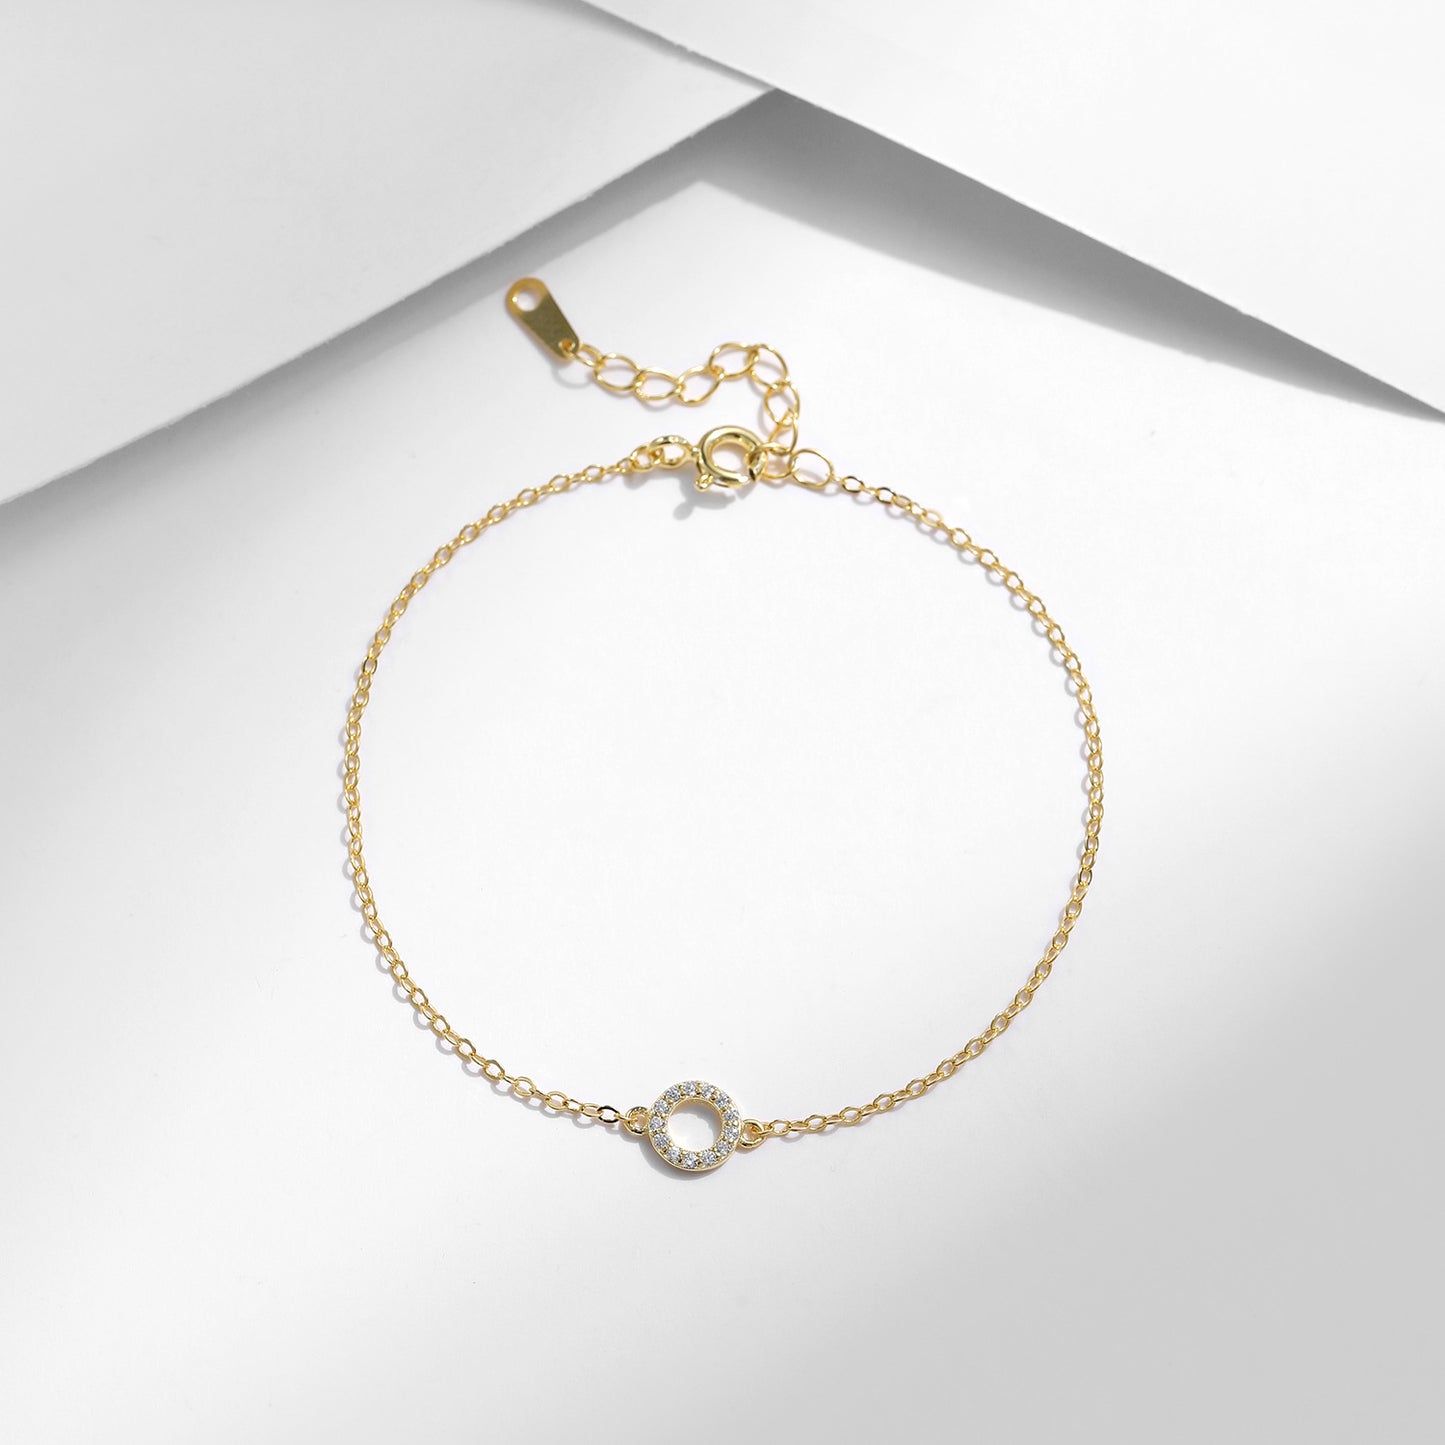 Exquisite Sterling Silver Bracelet with K Gold Accent